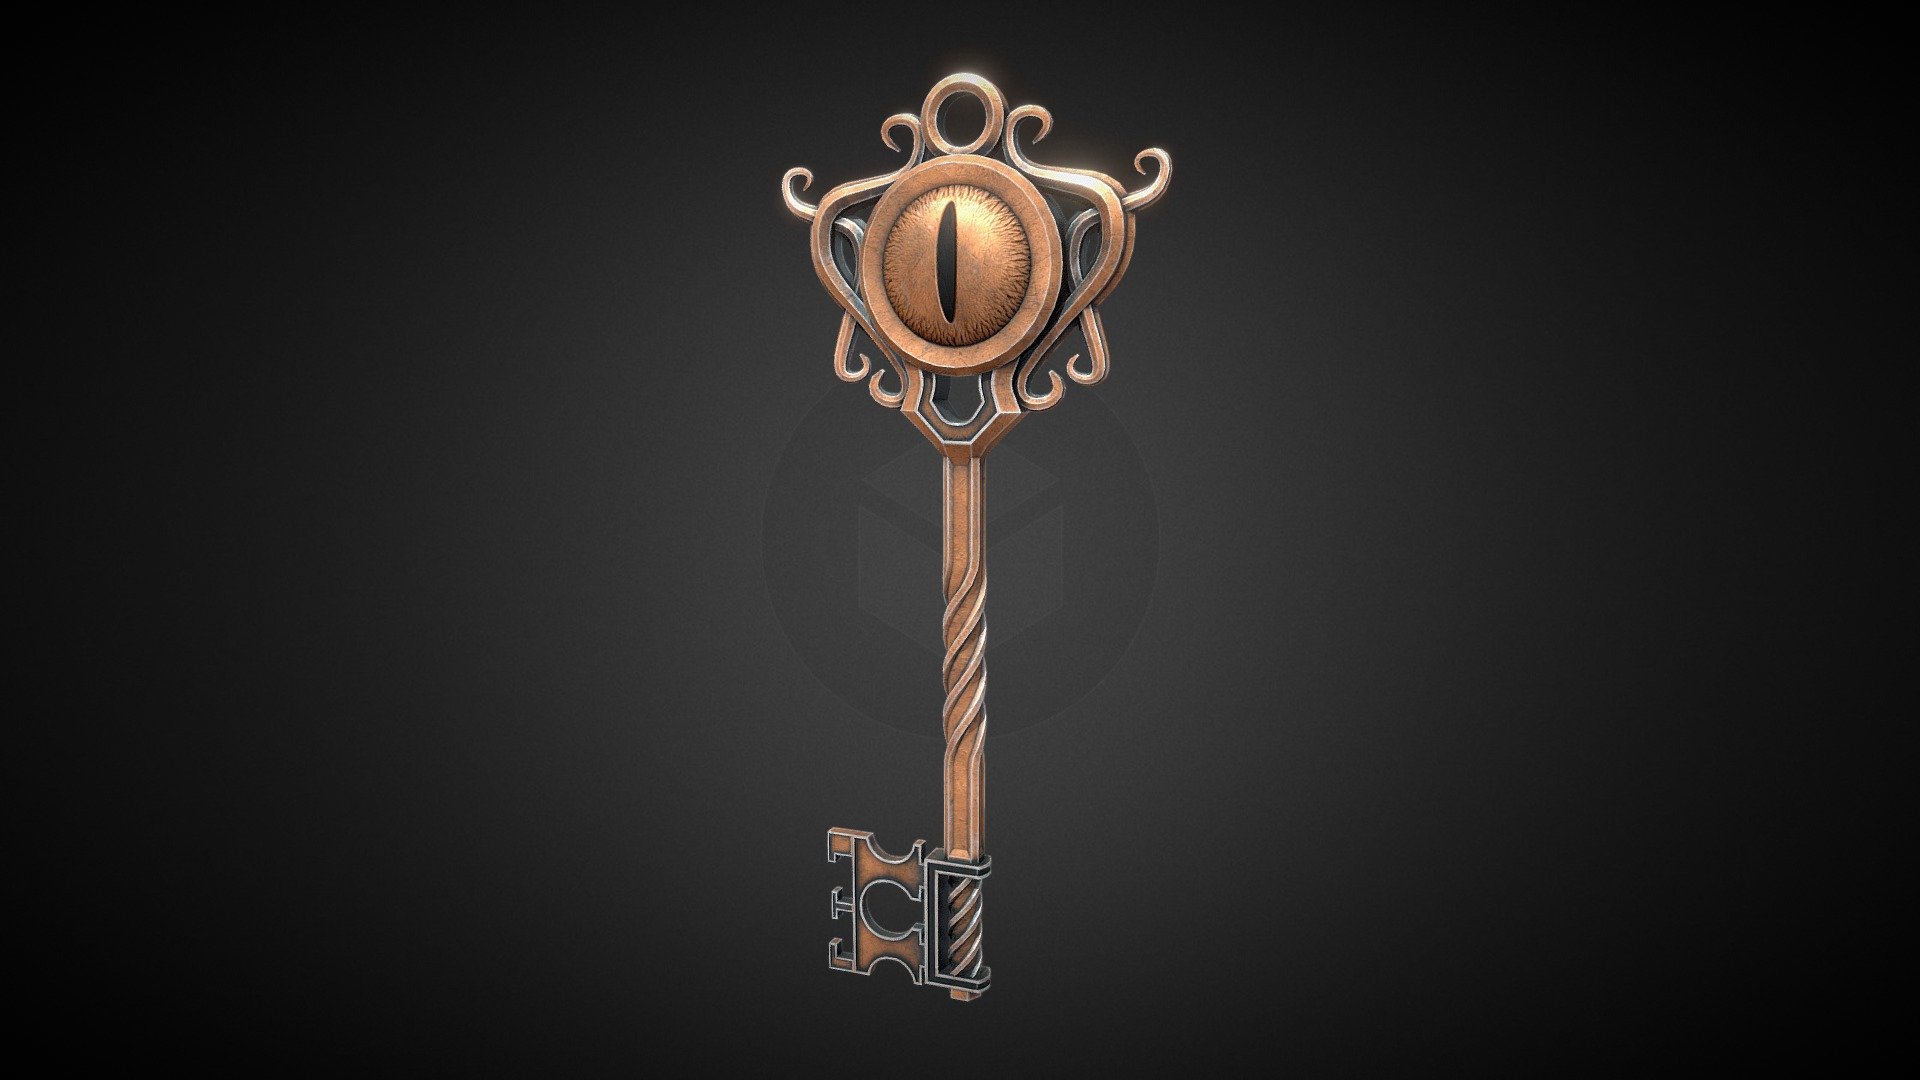 Key inspired by Resident Evil 4 remake. I recently played it and got the urge to make some kind of 3D model that could fit into the game 3d model